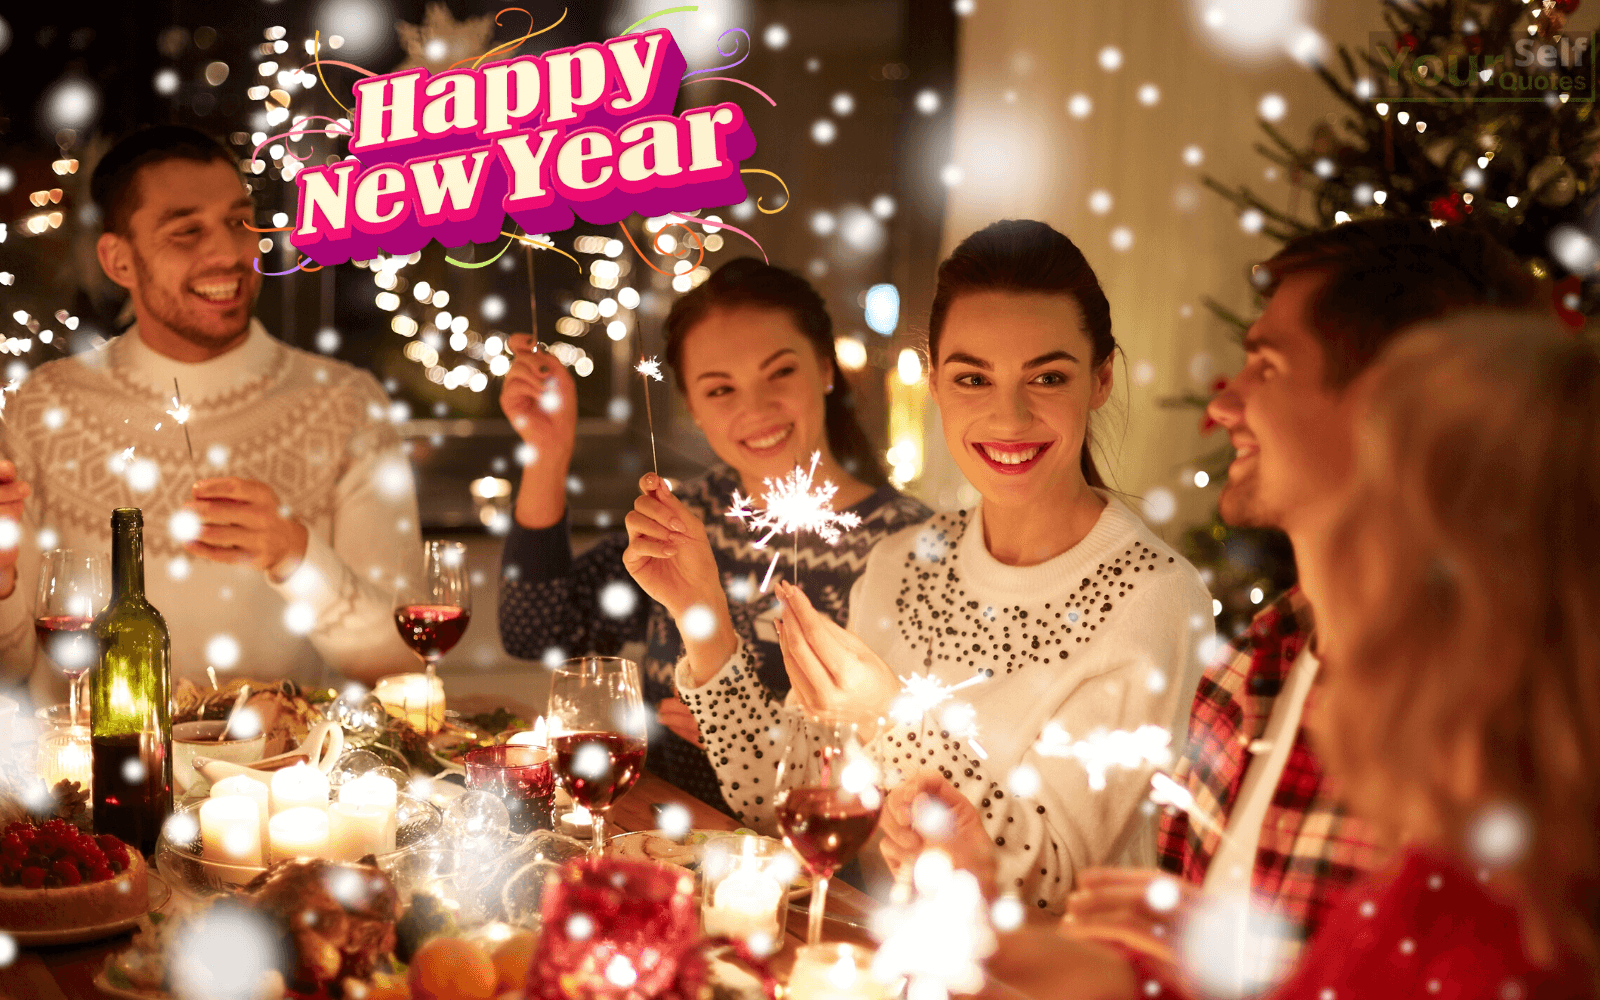 New Year Wishes Wallpaper - People Celebrating Christmas - HD Wallpaper 